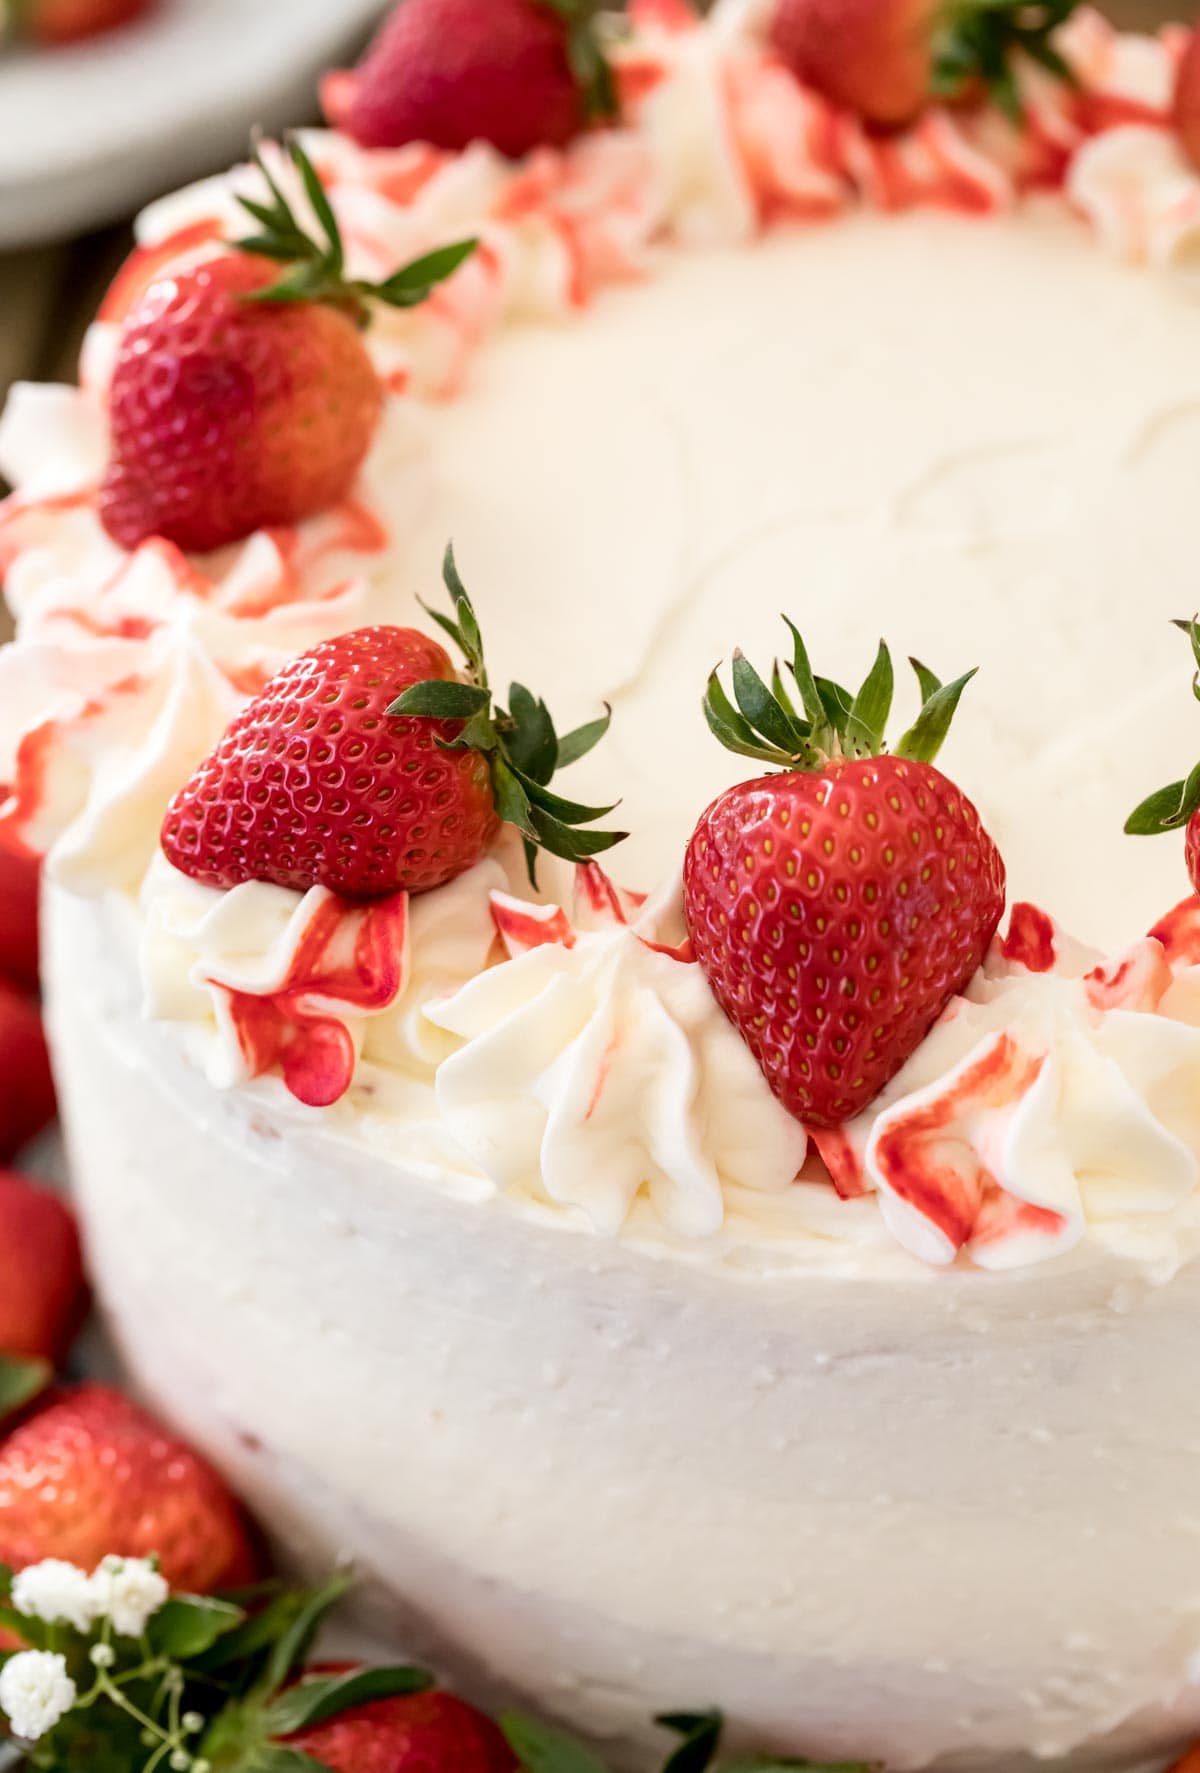 white iced cake with red strawberries